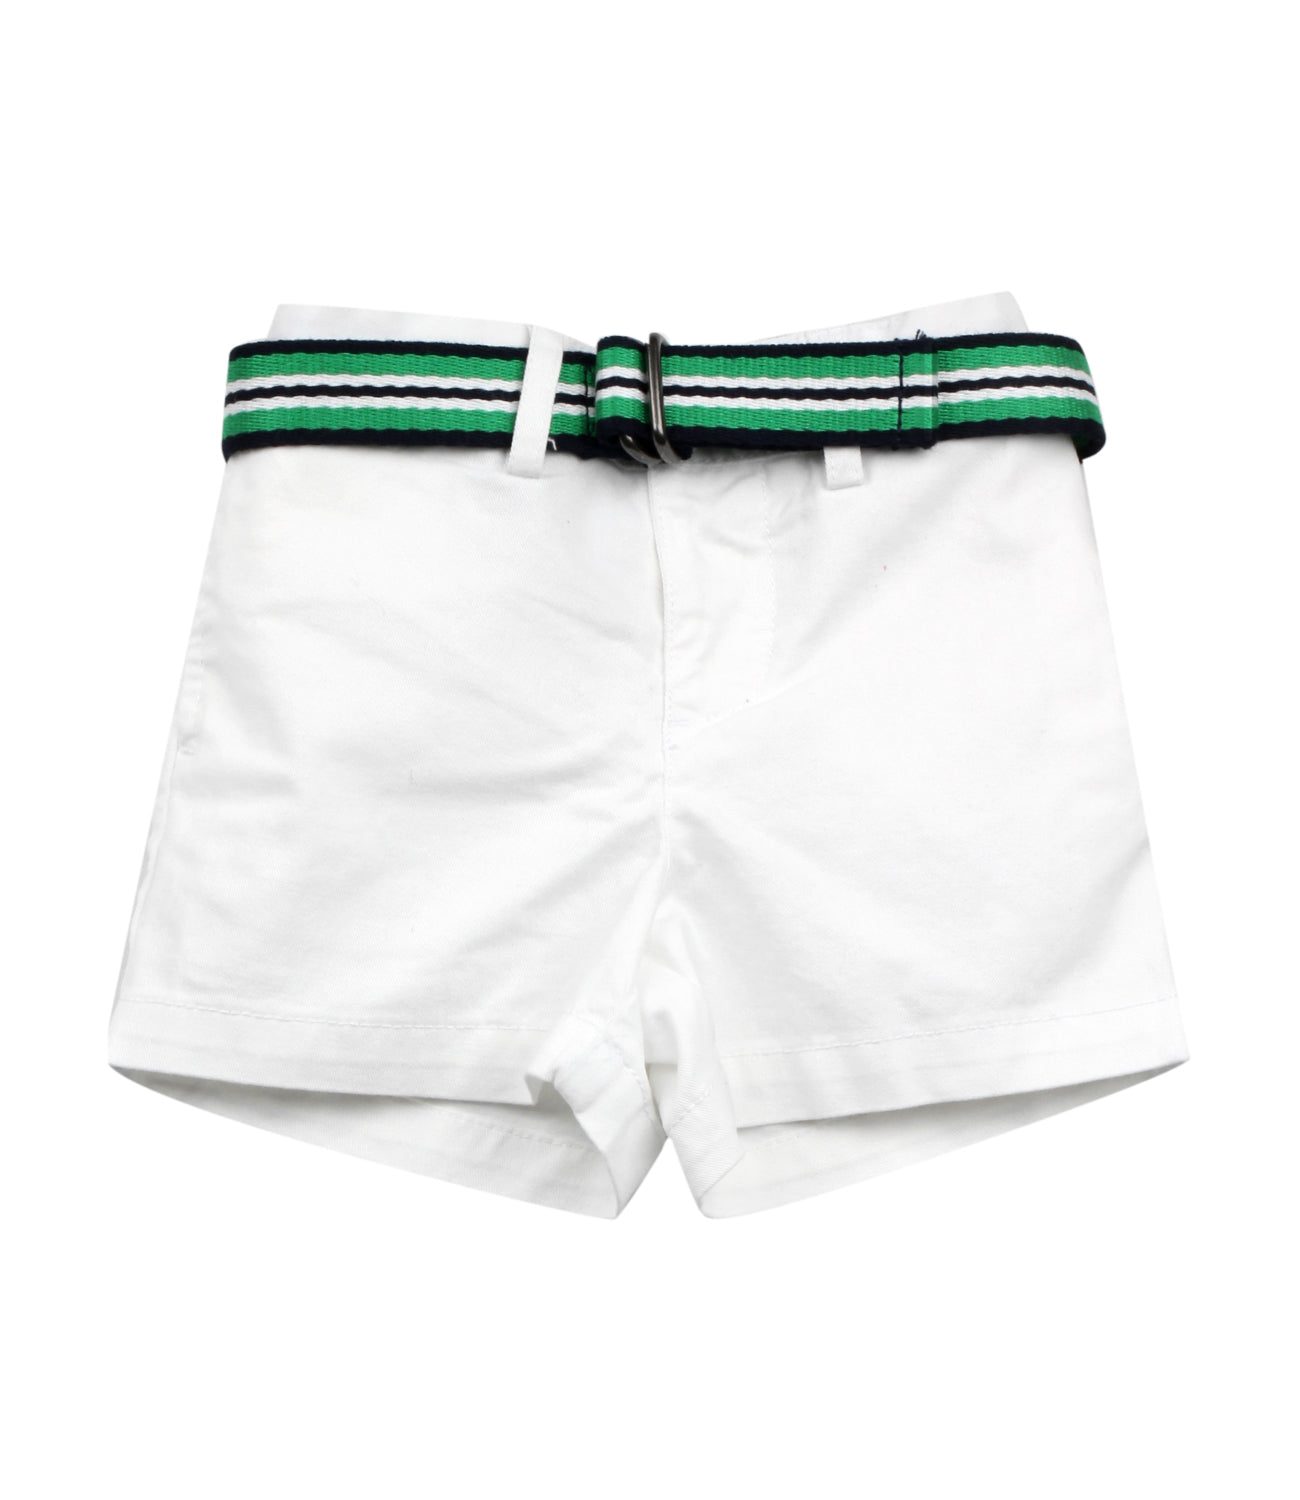 Slim-Fit stretch shorts with belt